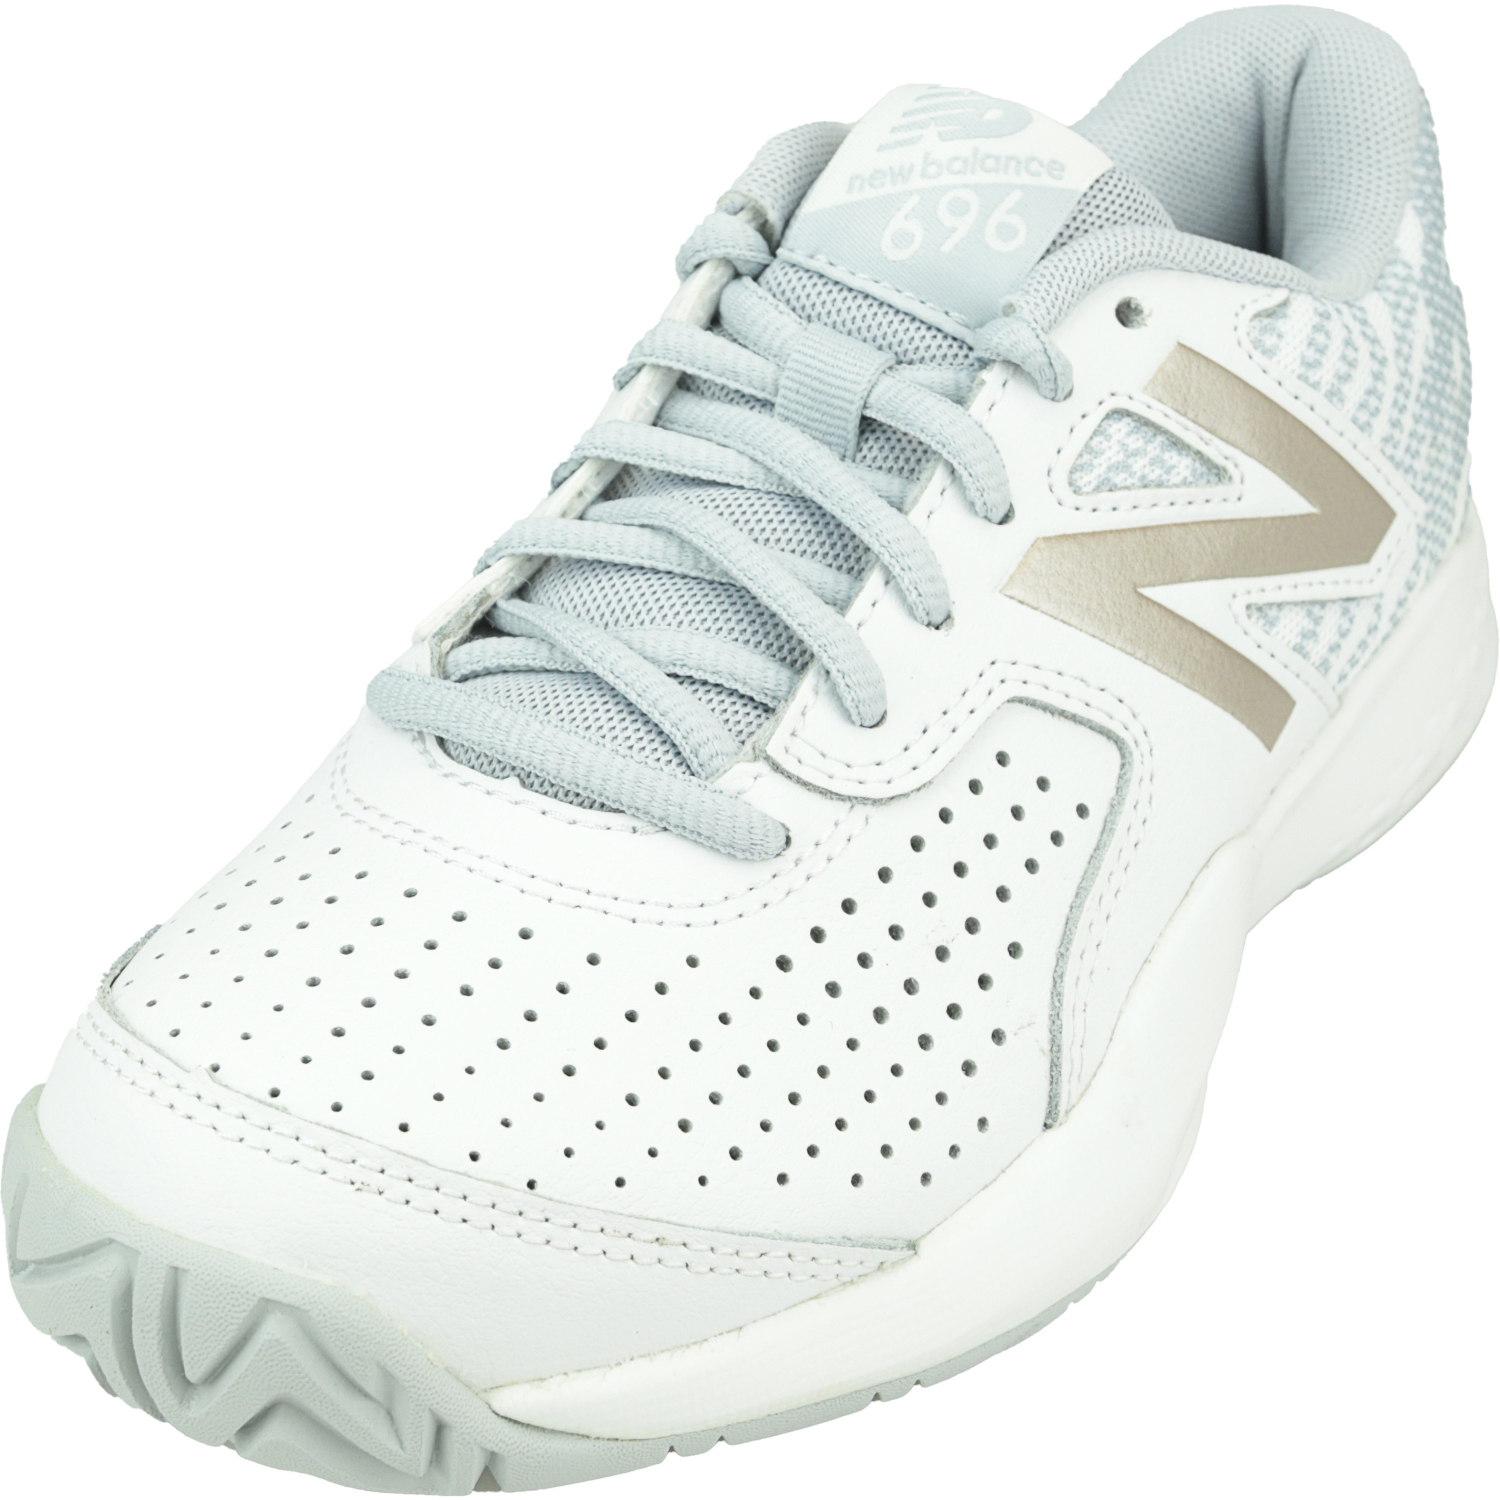 high ankle tennis shoes